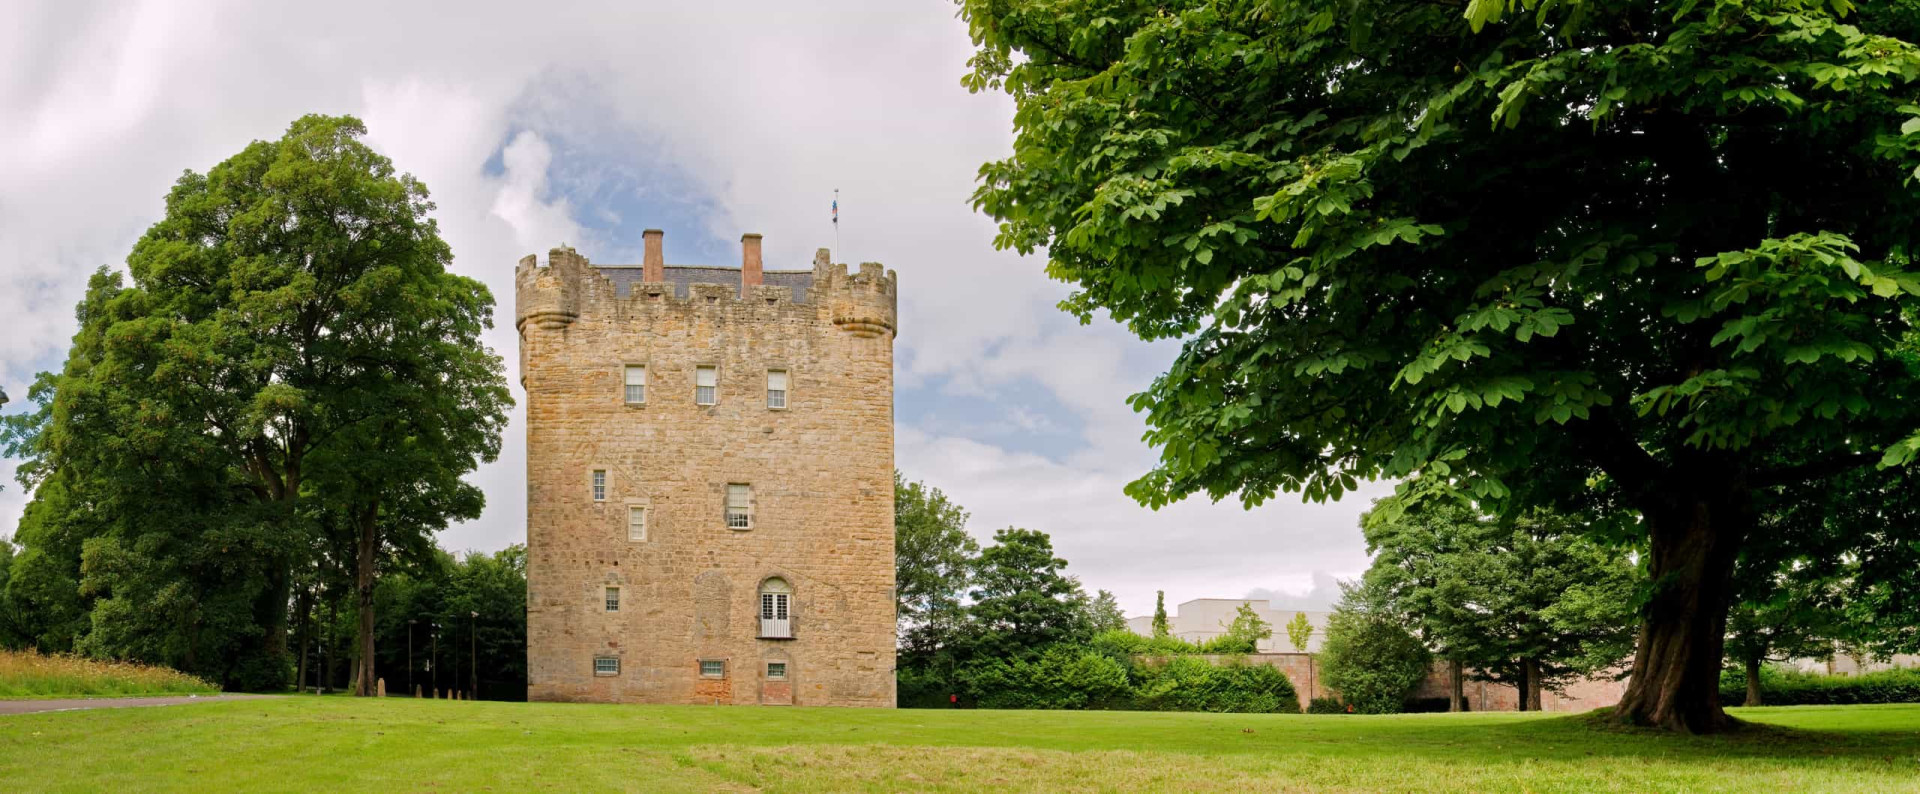 <p>The Erskine family history is certainly is a ghostly one. They owned this 700-year-old tower in the 16th century, and legend has it that a curse was put on the tower and its inhabitants.</p><p><a href="https://www.msn.com/en-ca/community/channel/vid-7xx8mnucu55yw63we9va2gwr7uihbxwc68fxqp25x6tg4ftibpra?cvid=94631541bc0f4f89bfd59158d696ad7e">Follow us and access great exclusive content every day</a></p>